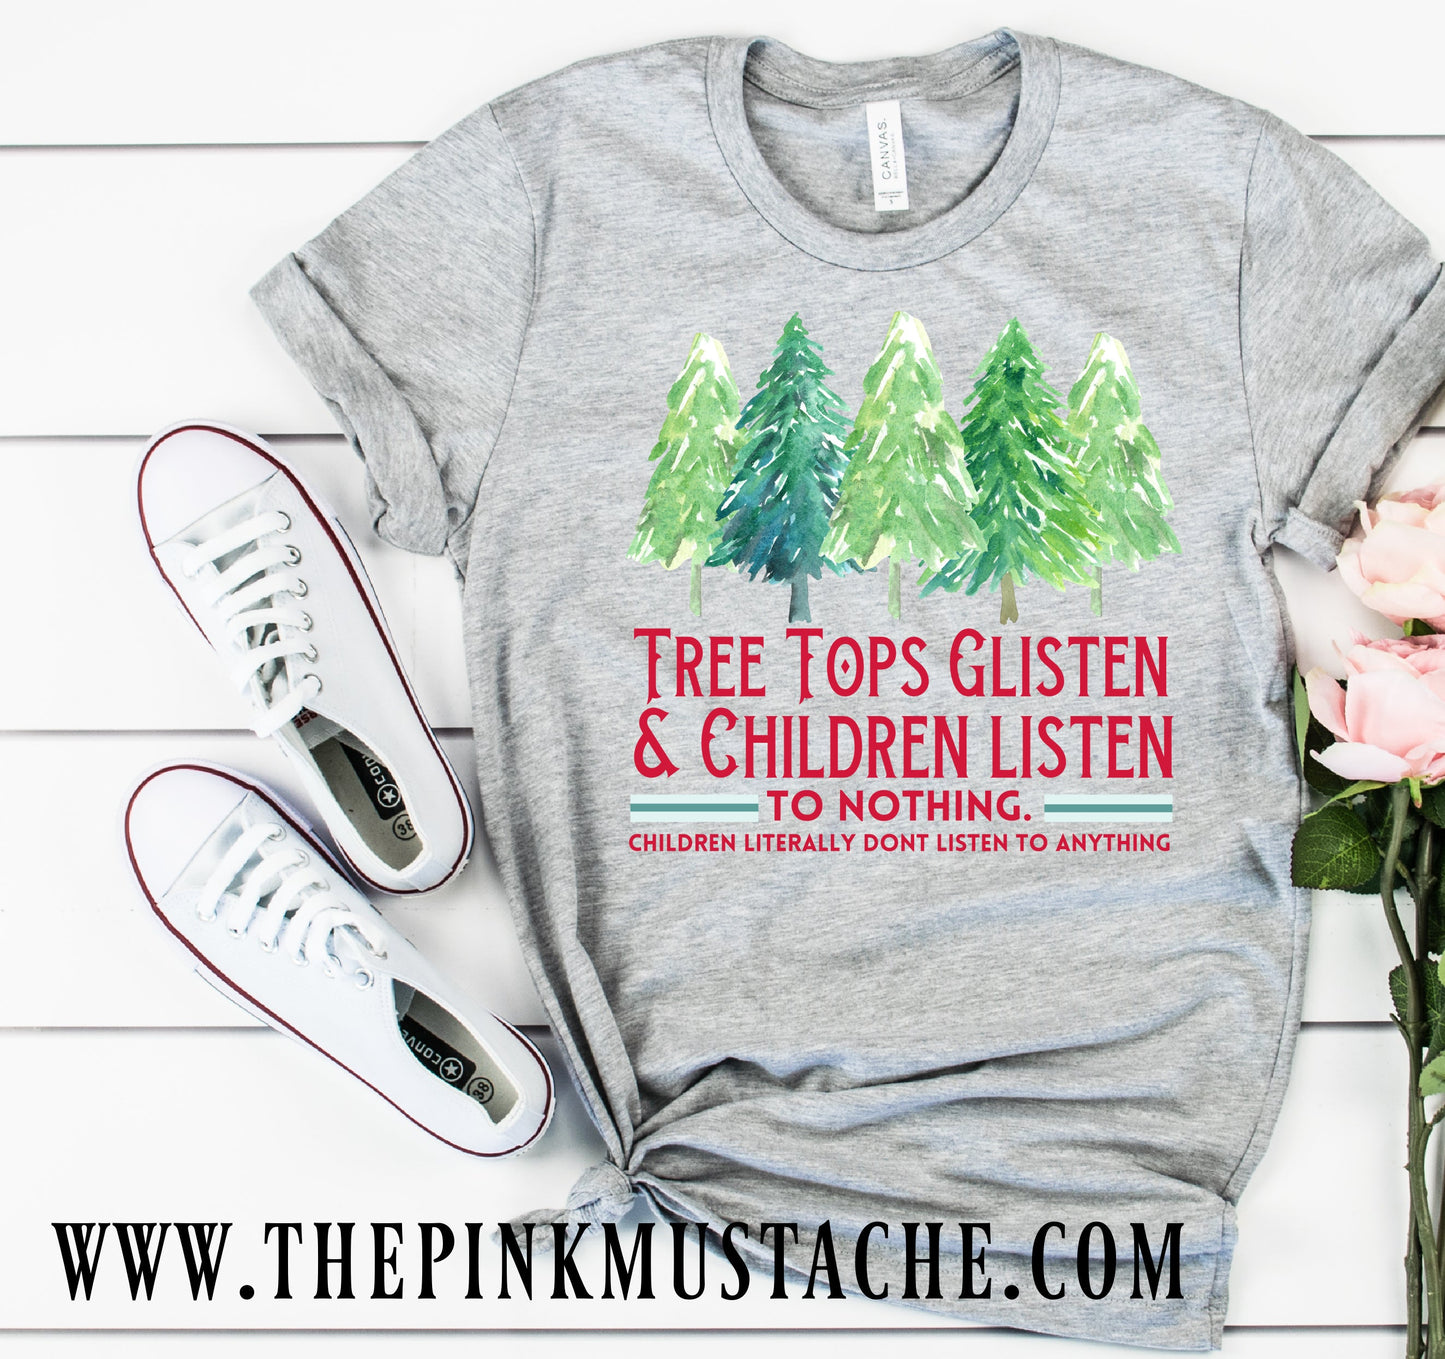 Tree Tops Glisten And Children Listen - To Nothing- Children Literally Don't Listen To Anything - Funny Christmas Shirt